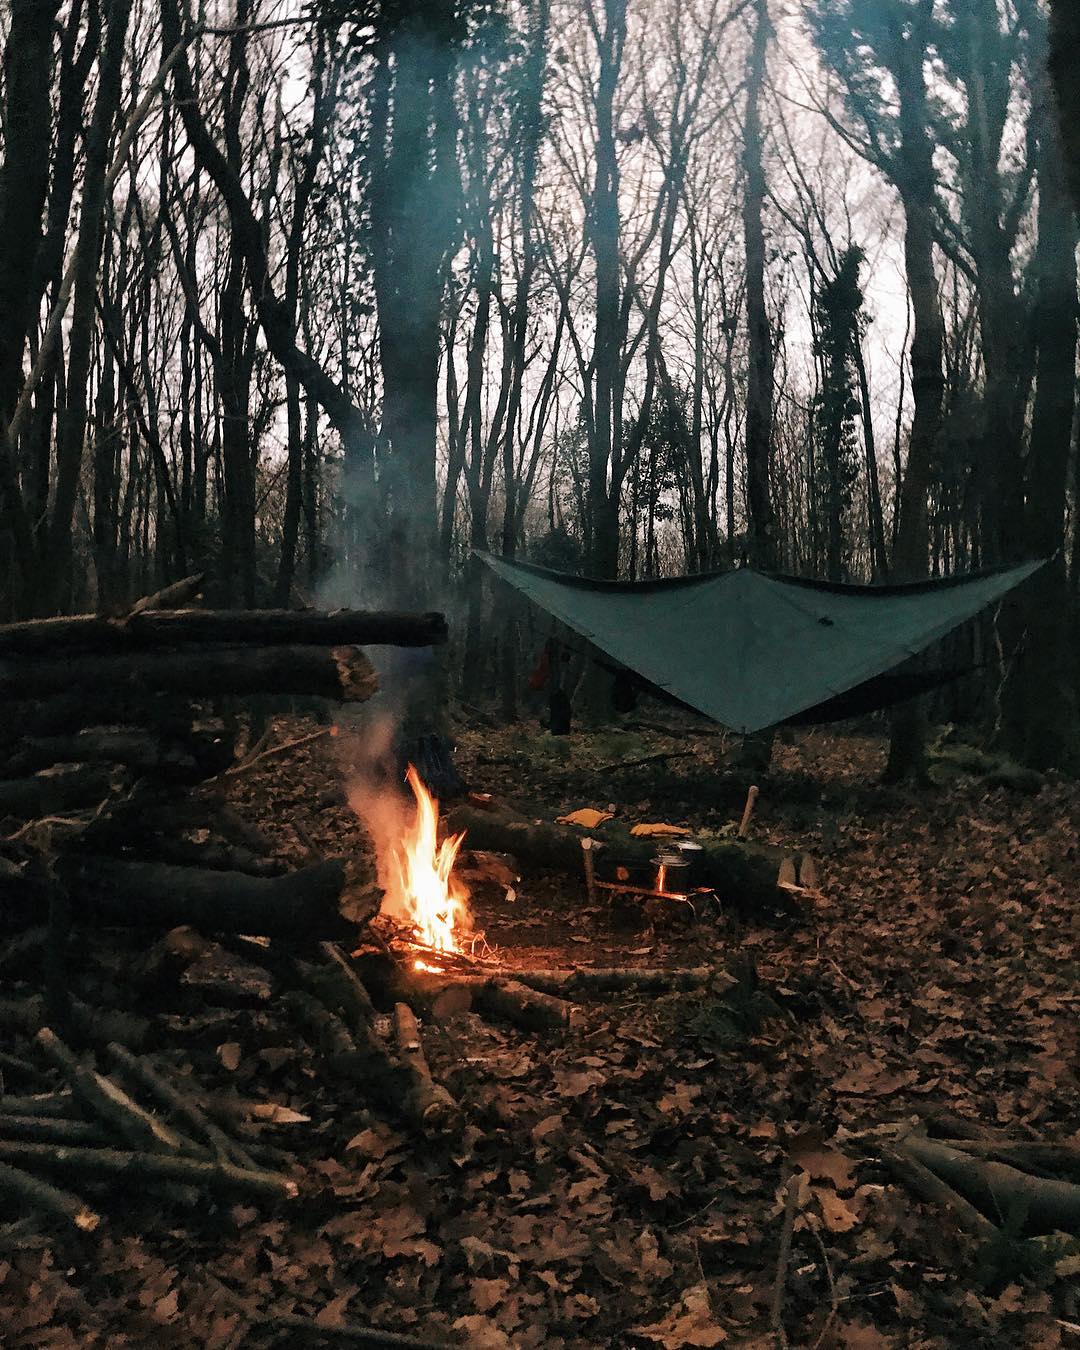 A campfire and hammock in some woods in autumn